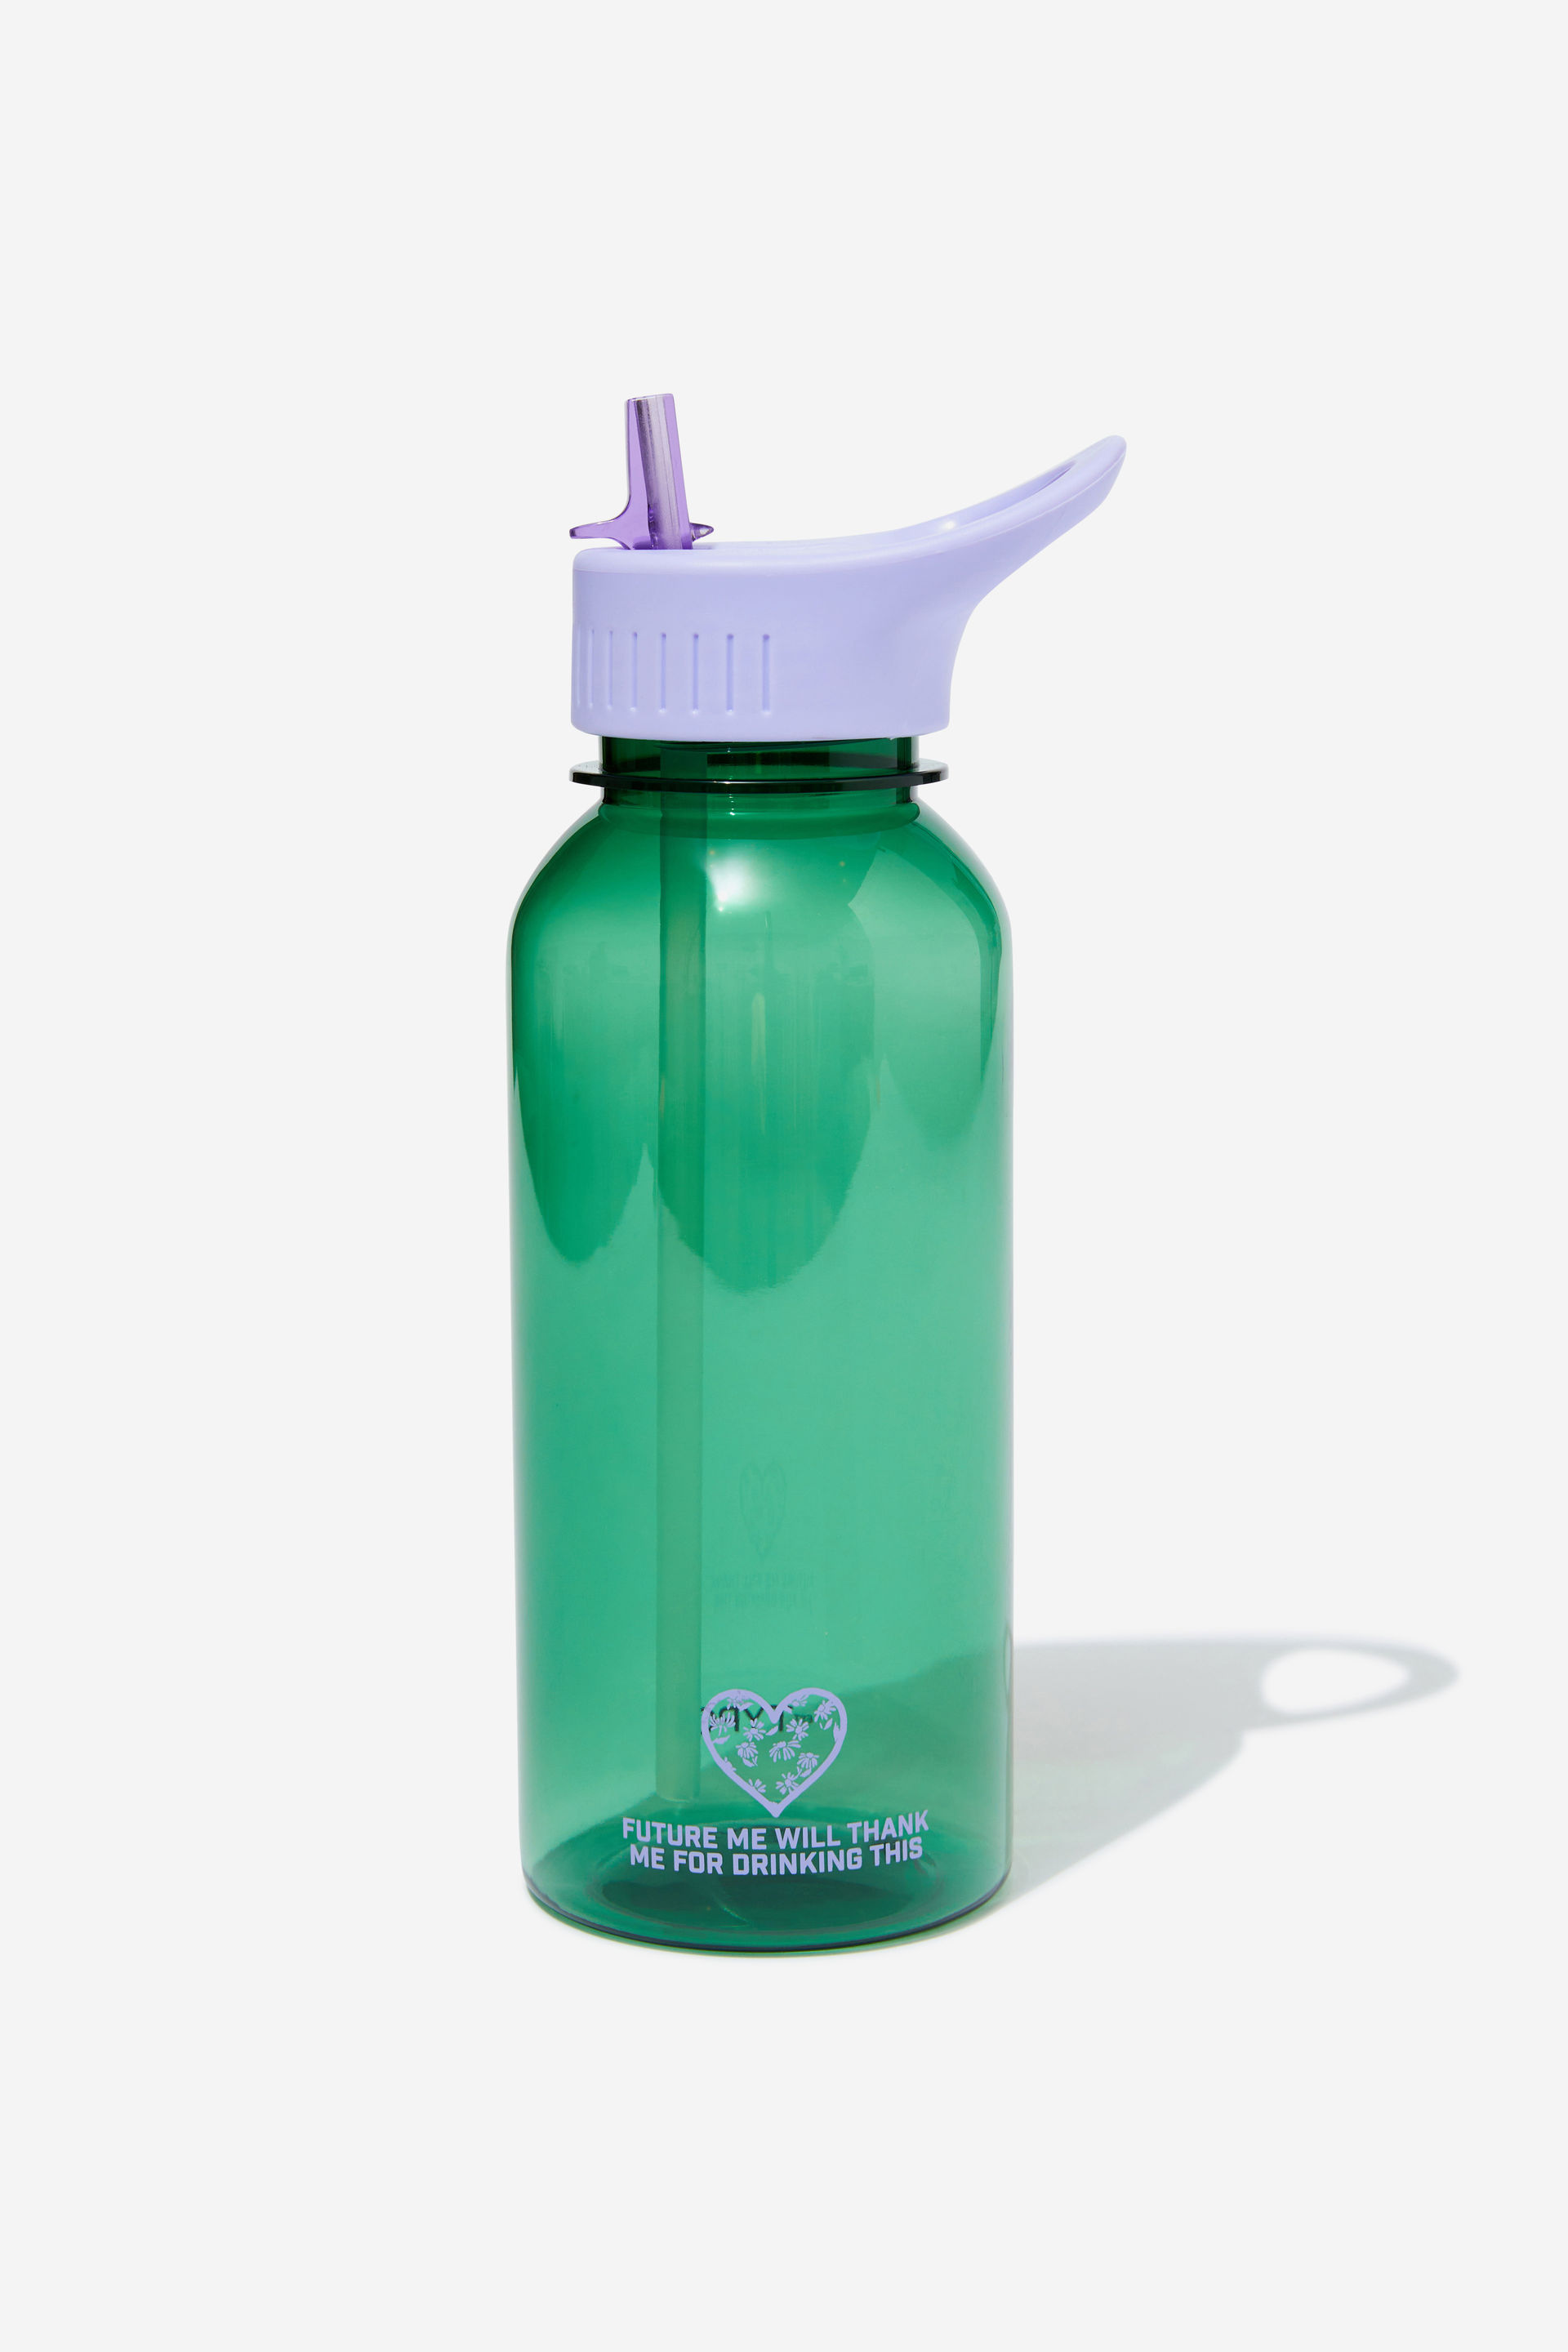 Typo - Drink It Up Bottle - Future me green